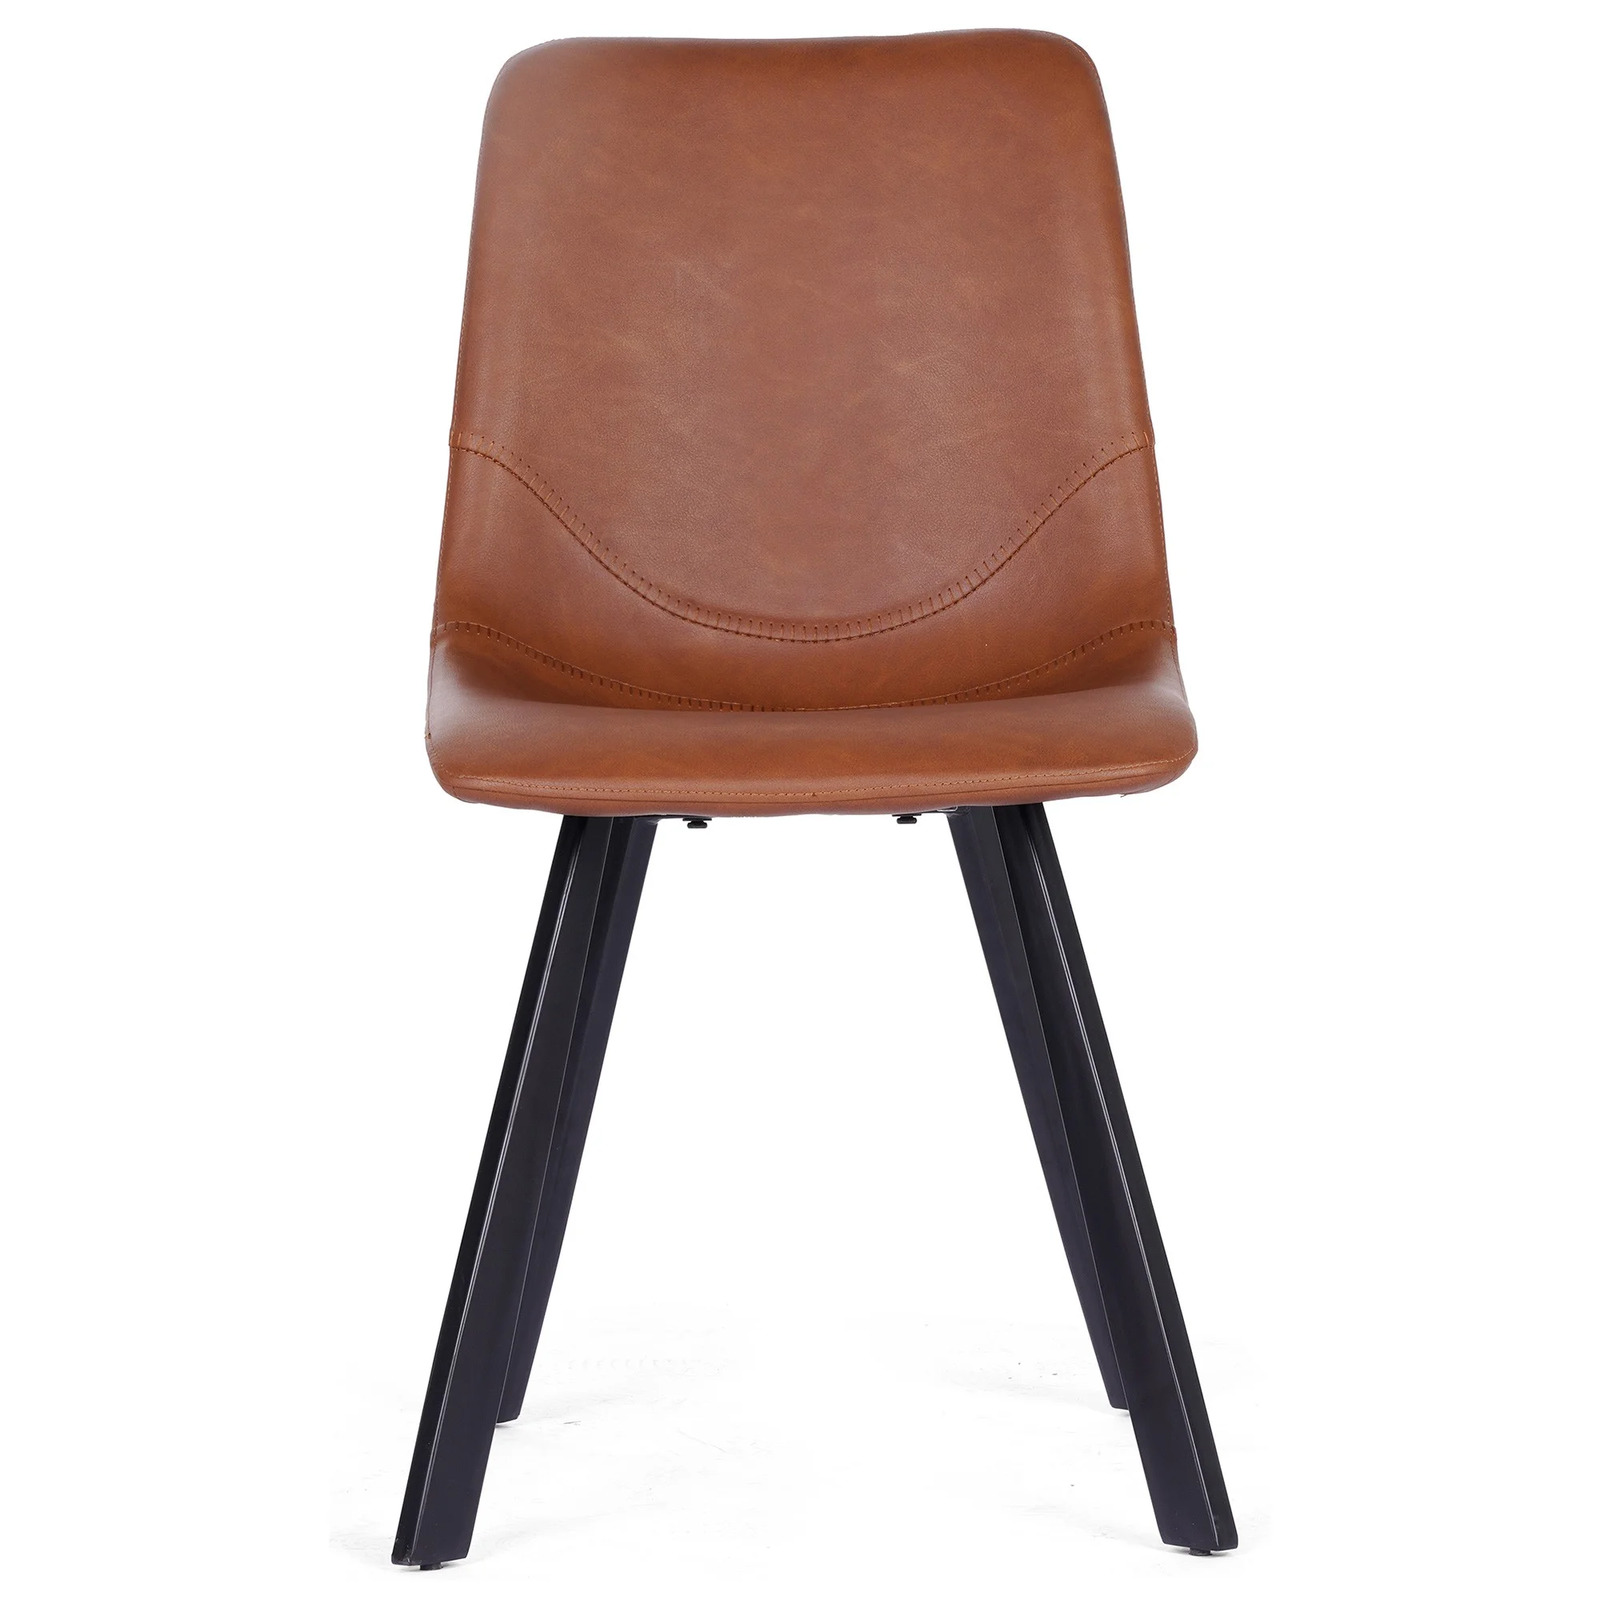 Trac Faux Leather Dining Chair, Cognac Set of 2